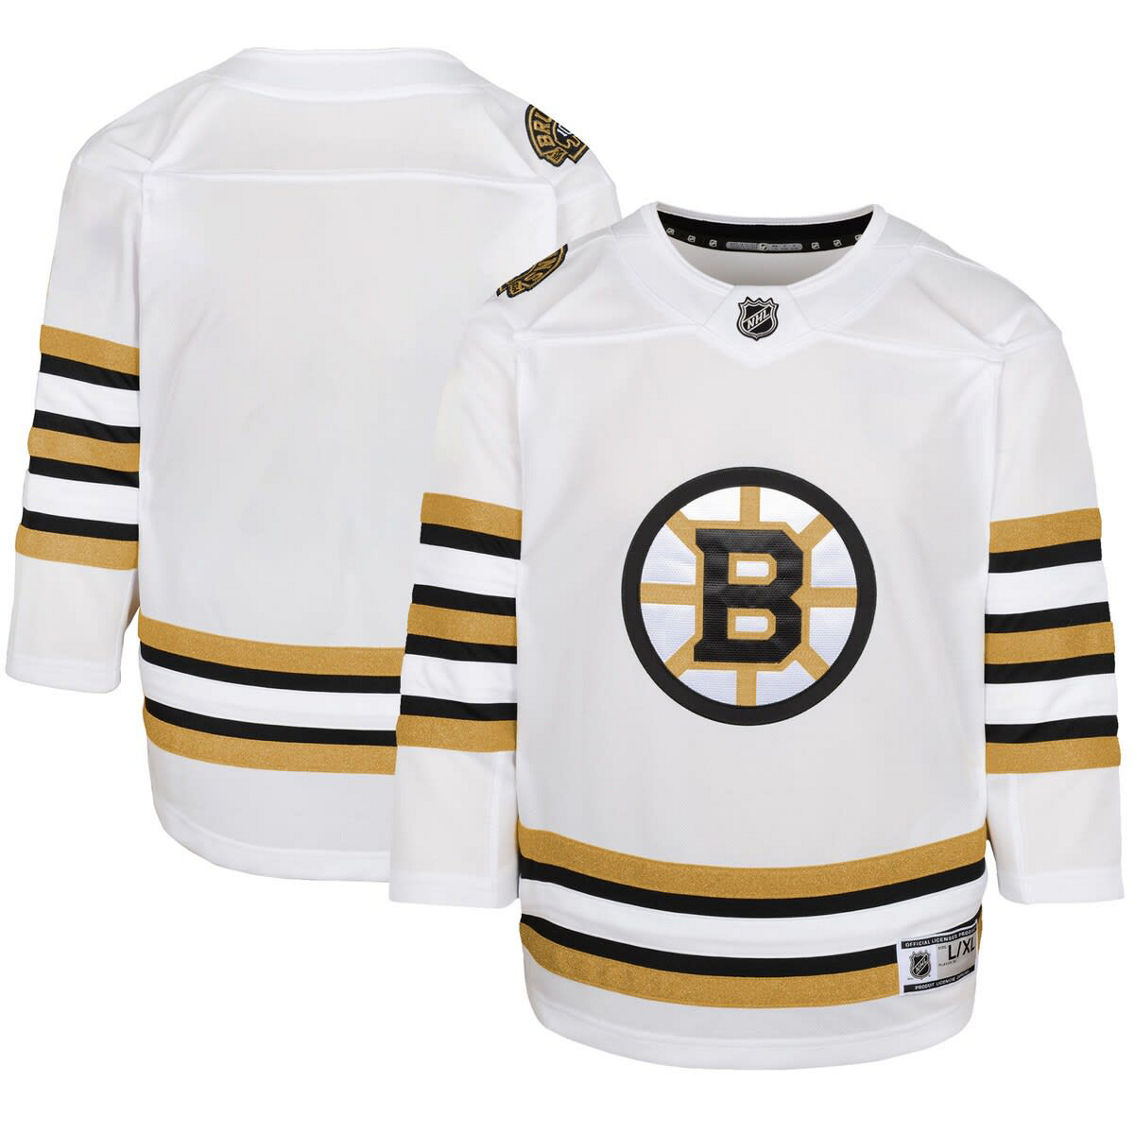 Outerstuff Youth White Boston Bruins 100th Anniversary Premier Jersey - Image 2 of 4